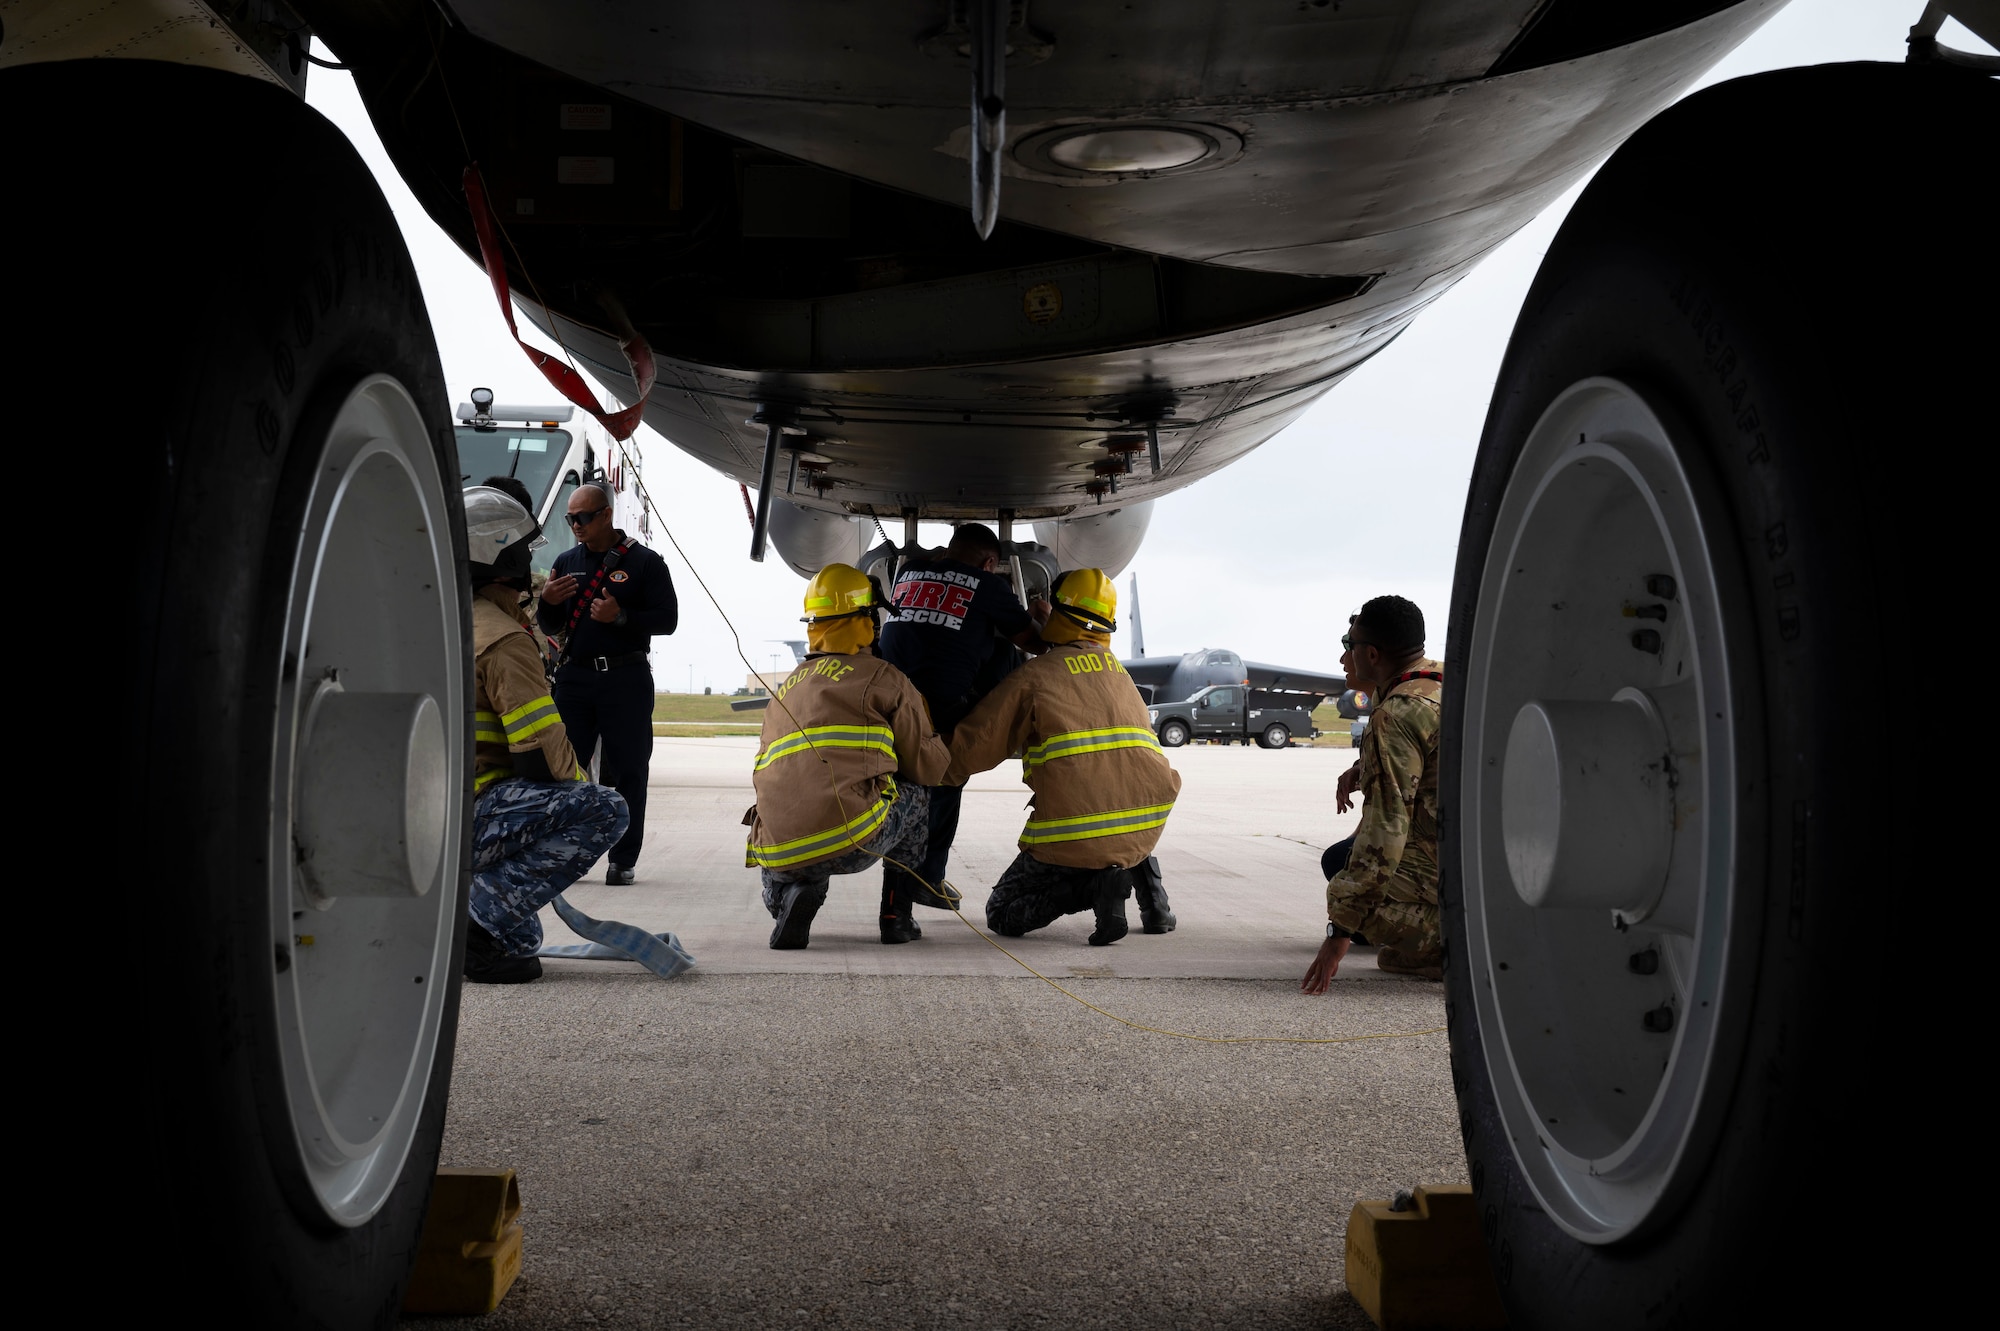 U.S. Air Force, Japan Air Self-Defense Force and Royal Australian Air Force firefighters practice emergency response procedures as part of a trilateral firefighter training during Cope North 24 on Andersen Air Force Base, Guam, Feb. 15, 2024. During the training the USAF firefighters discussed hazards, aircraft entry, engine shut-down procedures and emergency rescue procedures on a B-52 Stratofortress, all of which are vital to secure agile combat employment operations. (U.S. Air Force photo by Airman 1st Class Spencer Perkins)